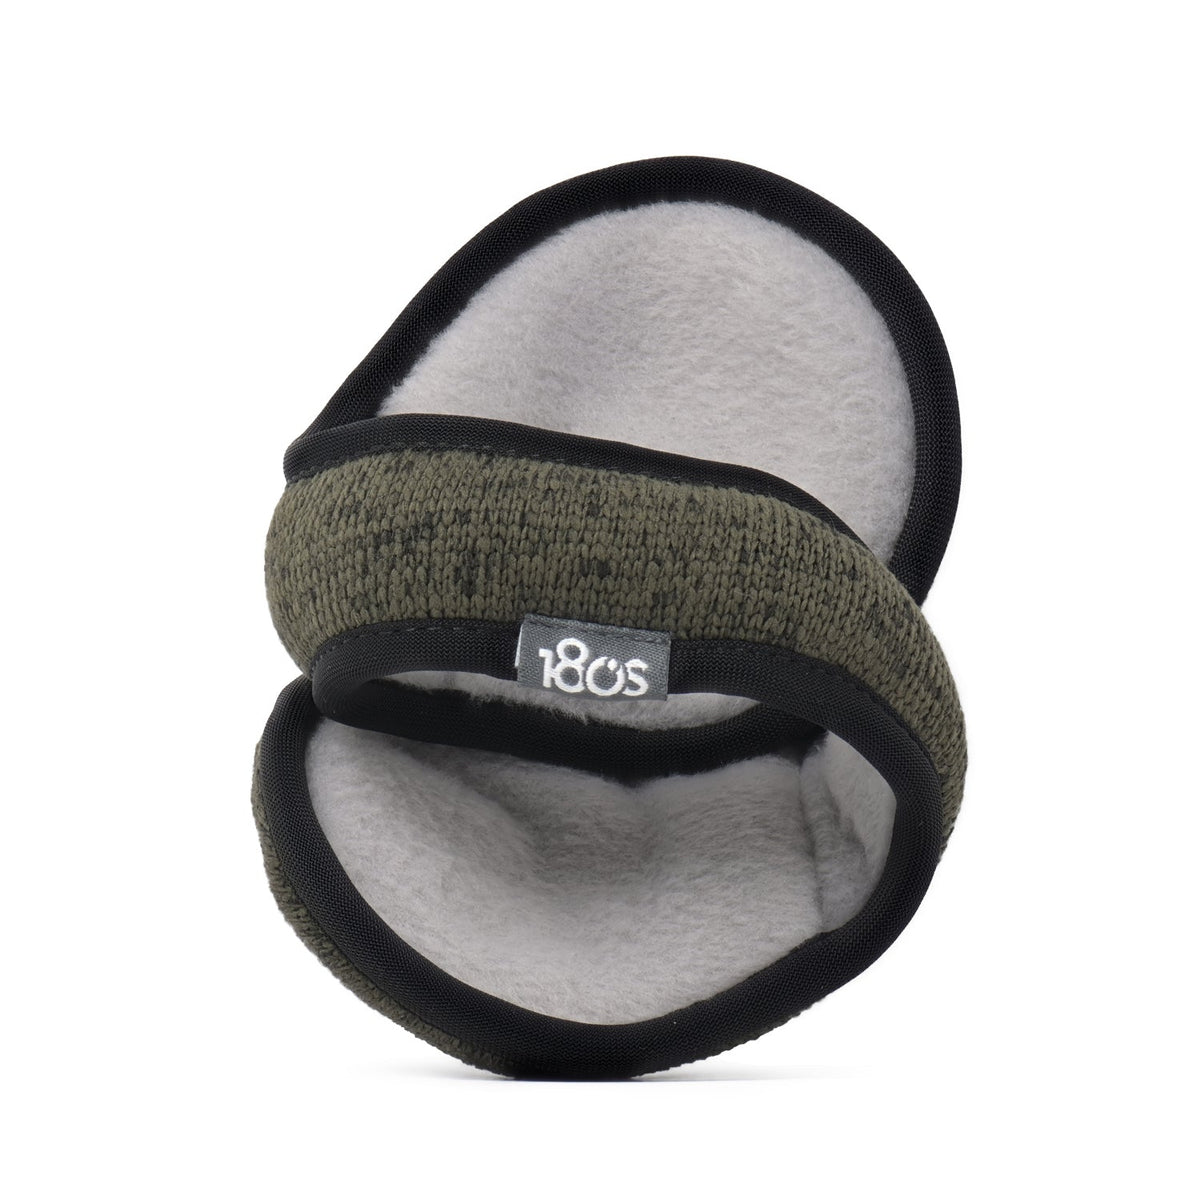 Aztec Ear Warmer Youth Olive Heather